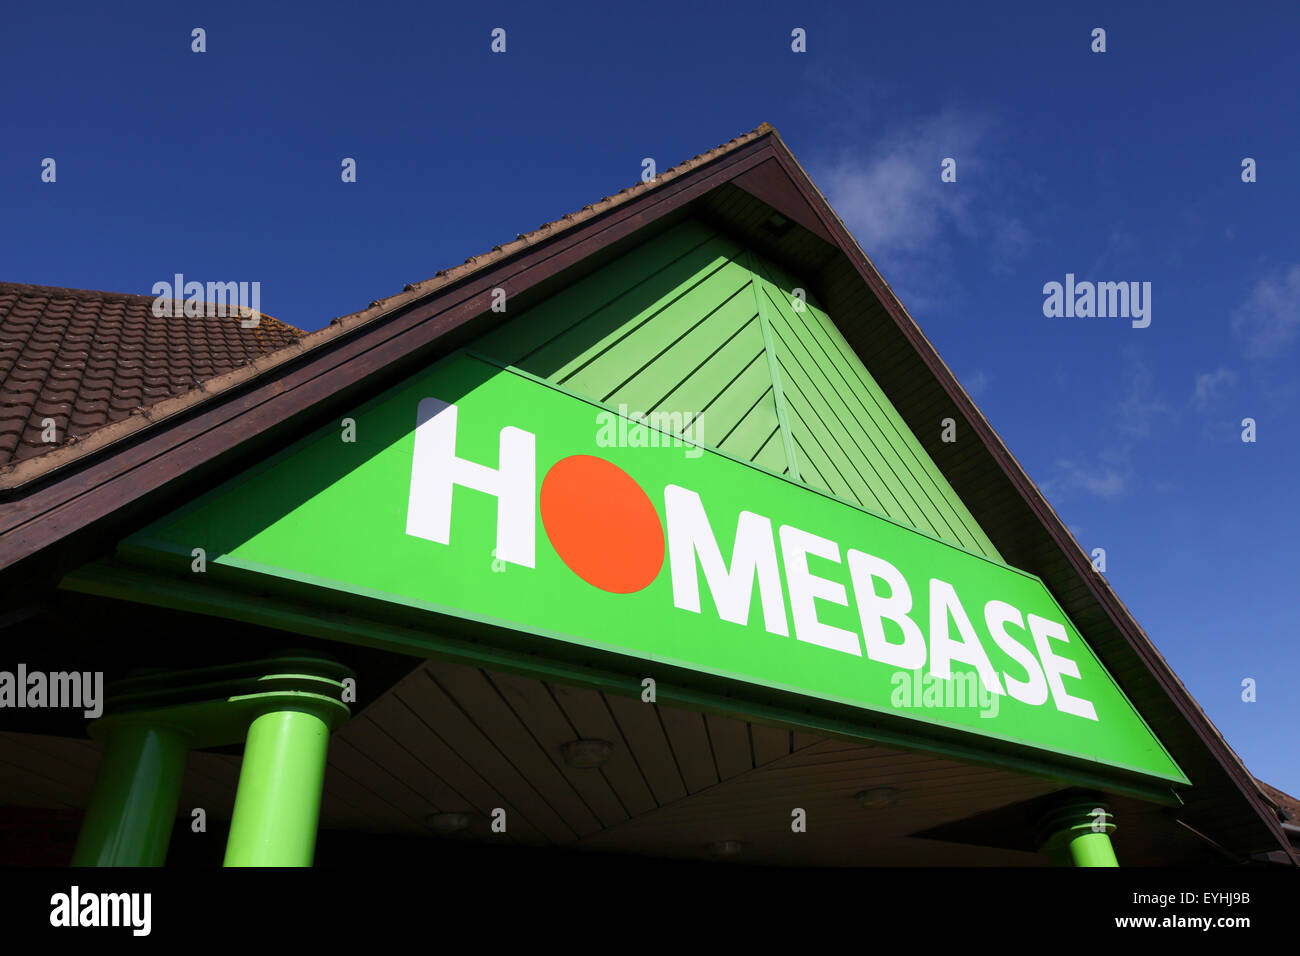 Exterior of a Homebase store in Southampton Stock Photo